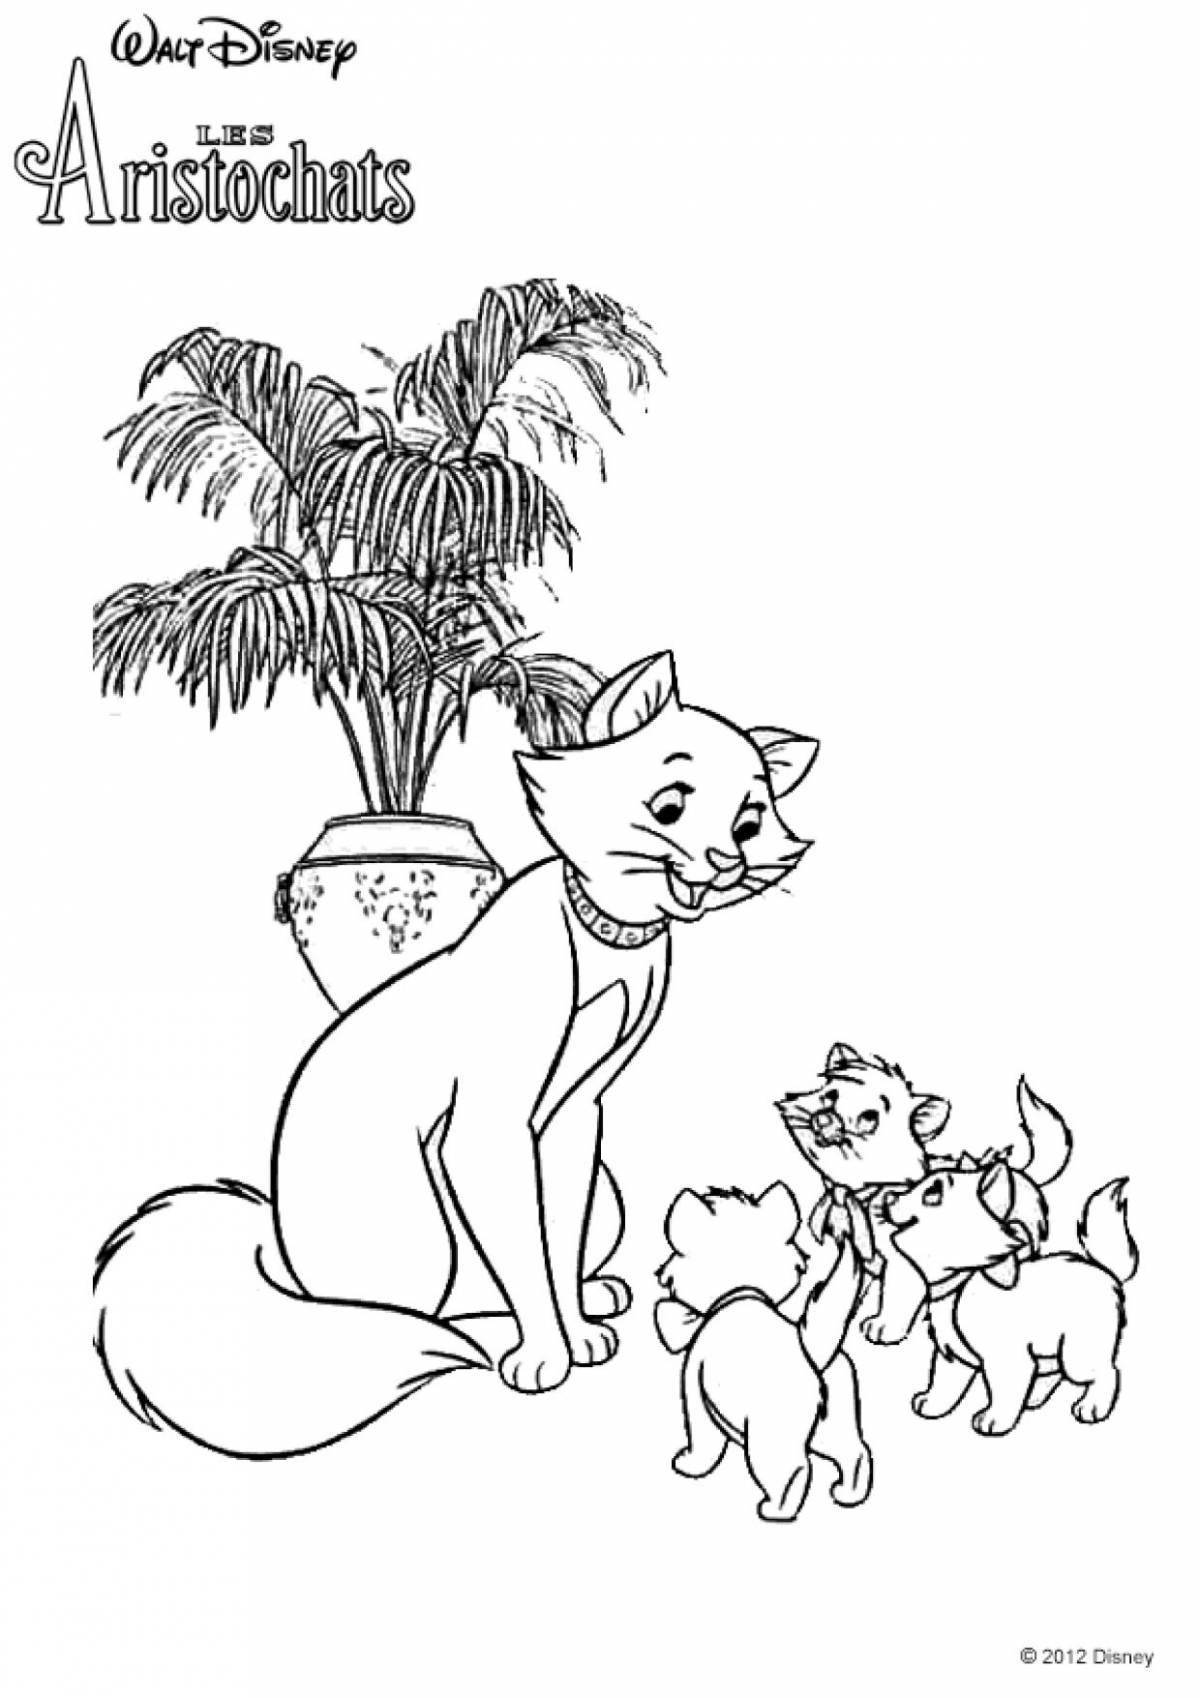 Cute cat family coloring page